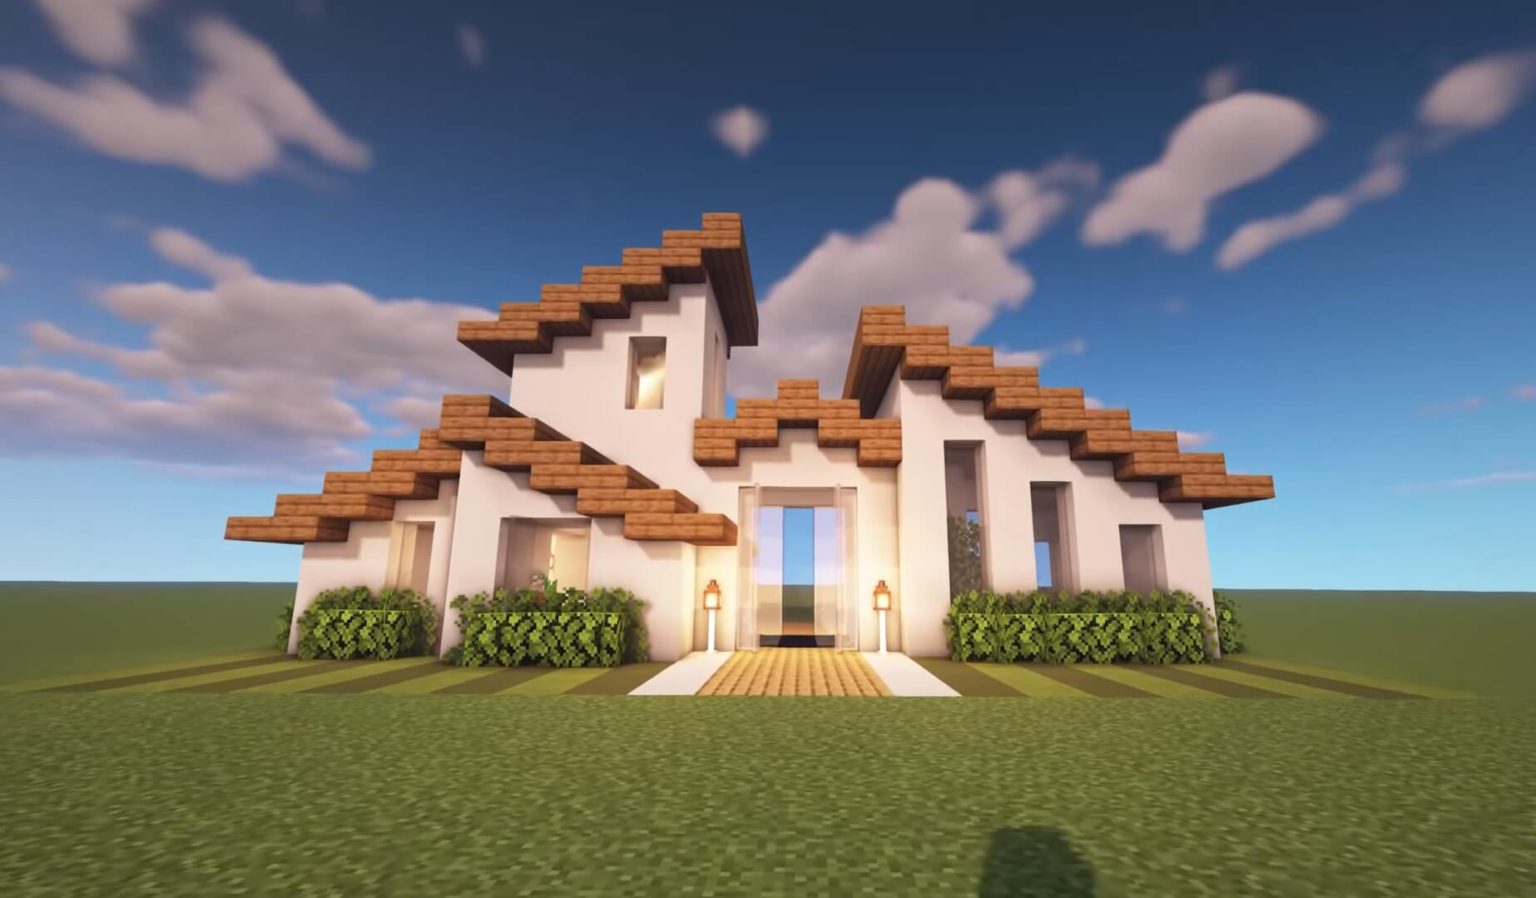 50 Awesome Minecraft Builds To Get Yourself Inspired - Minecraft ...